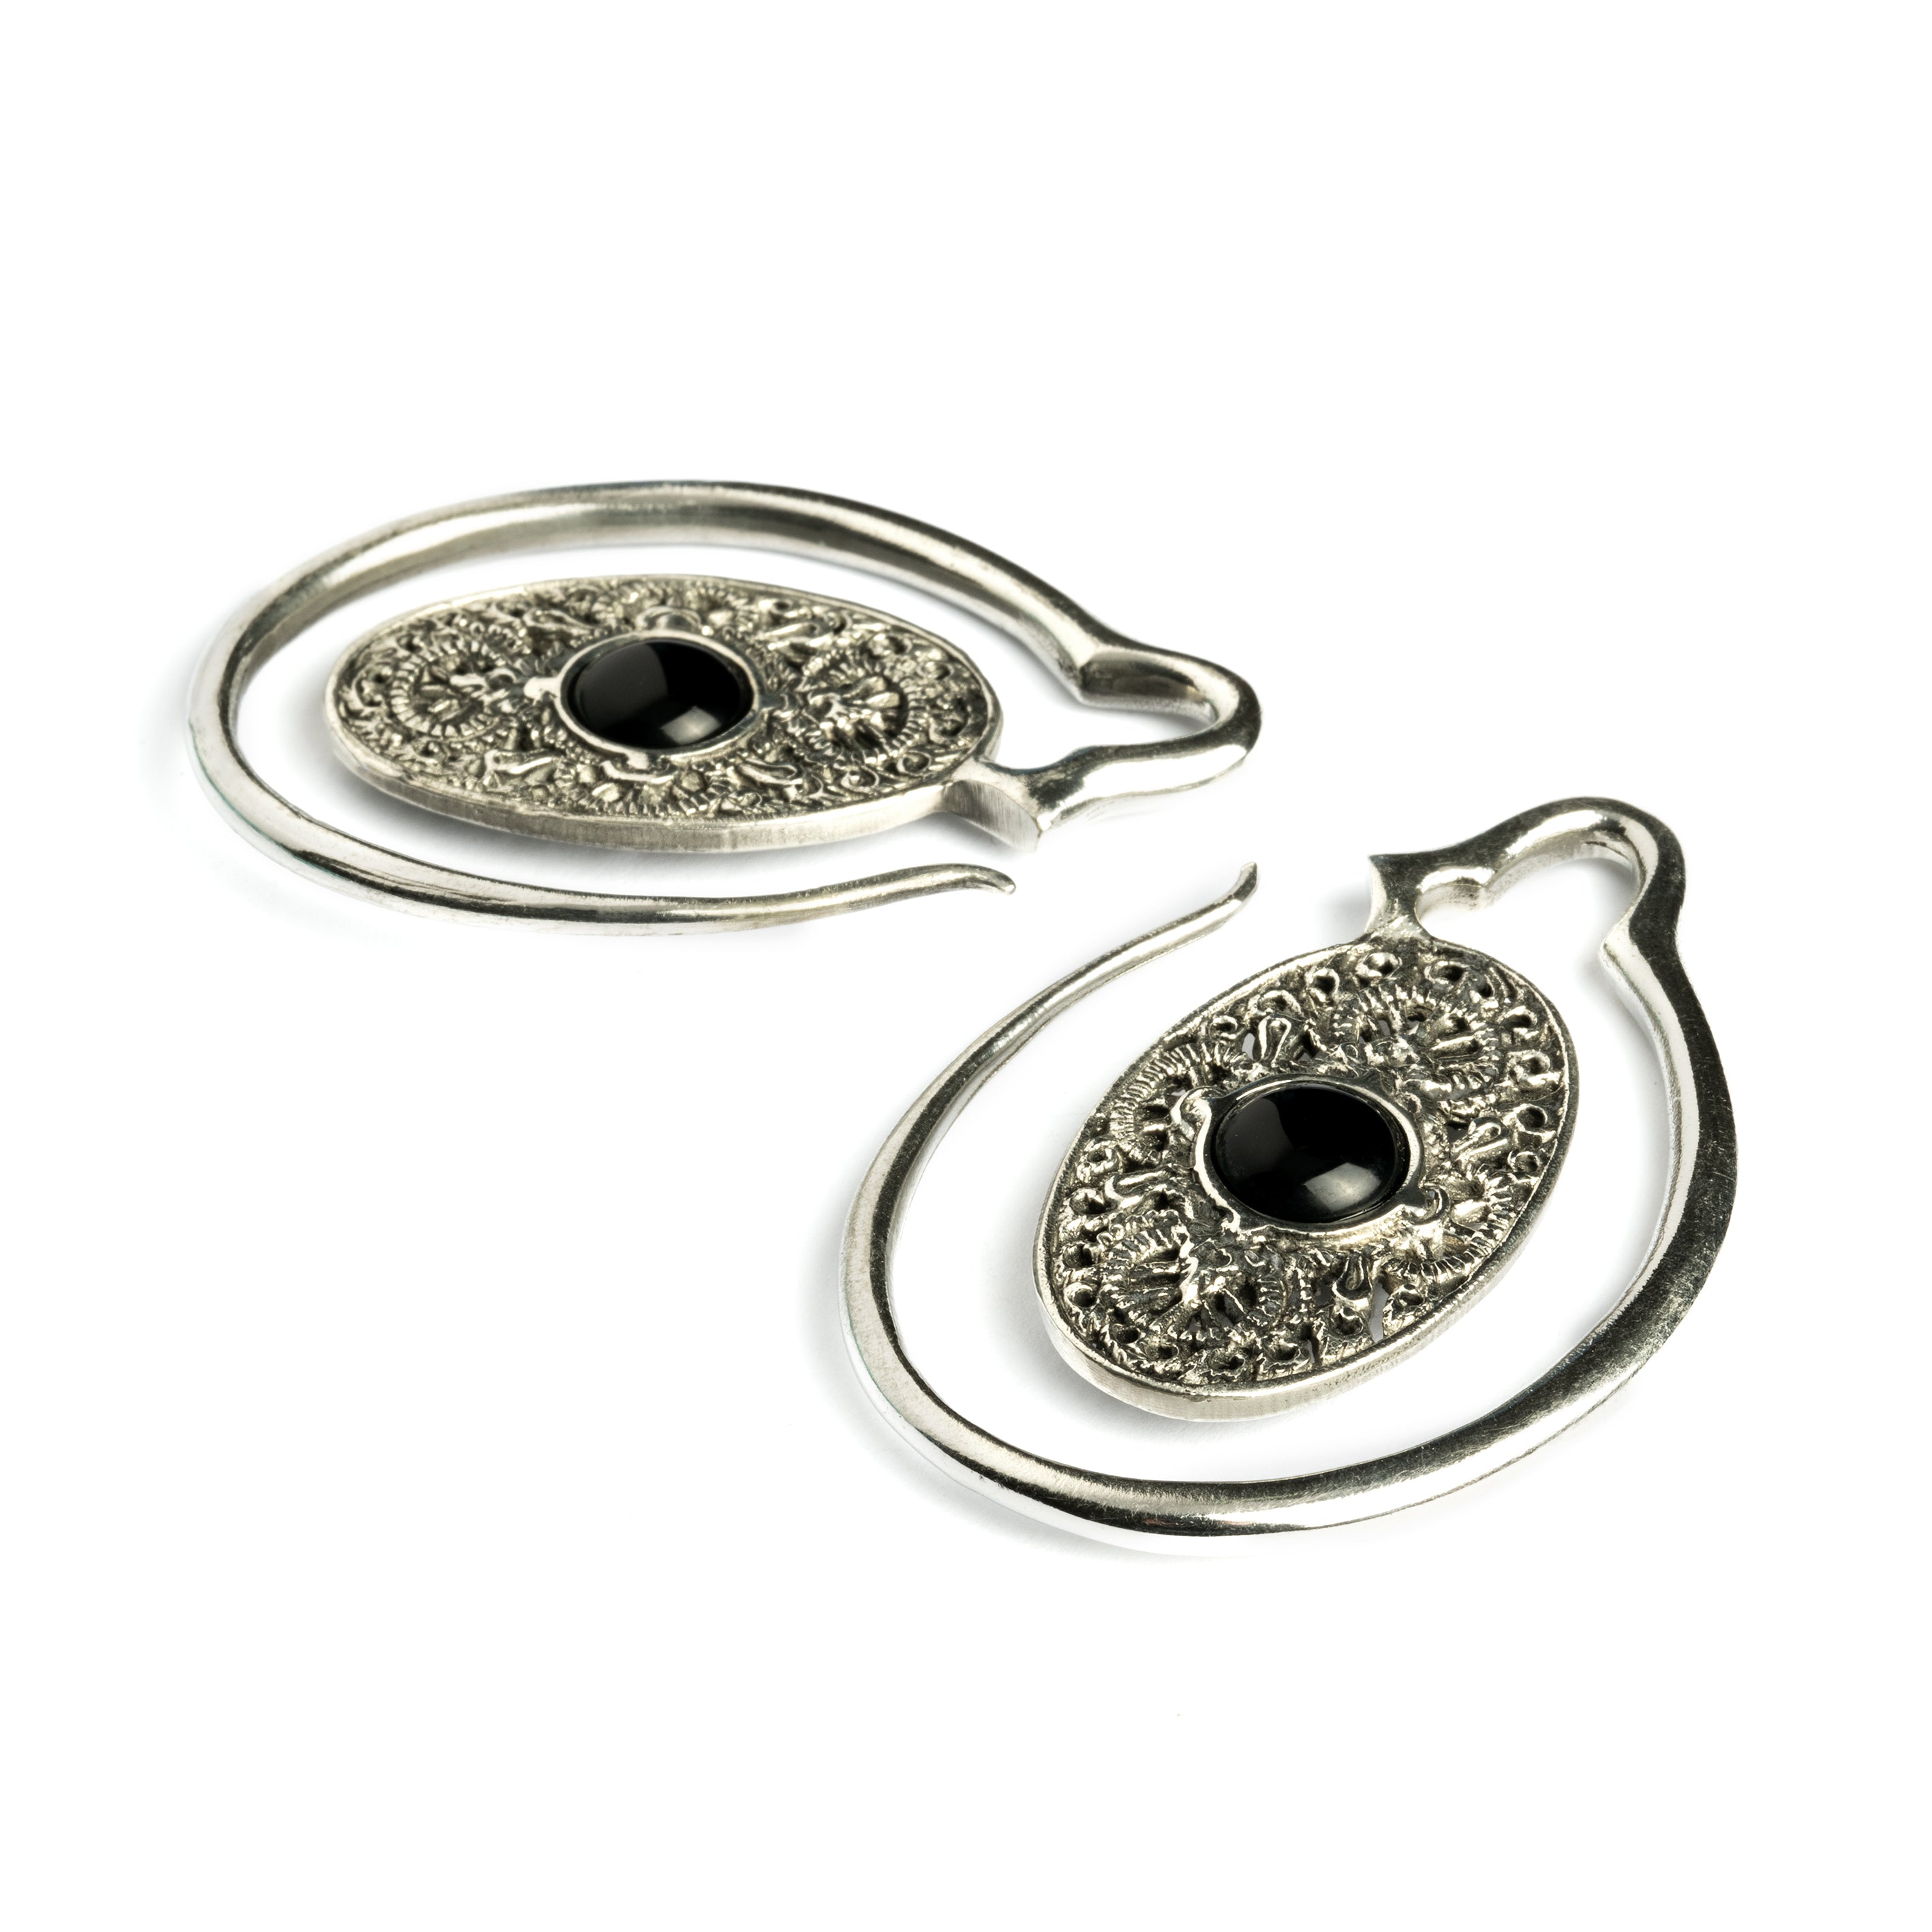 large ear weights hangers, silver colour oval shaped with intricate filigree pattern an black onyx down view